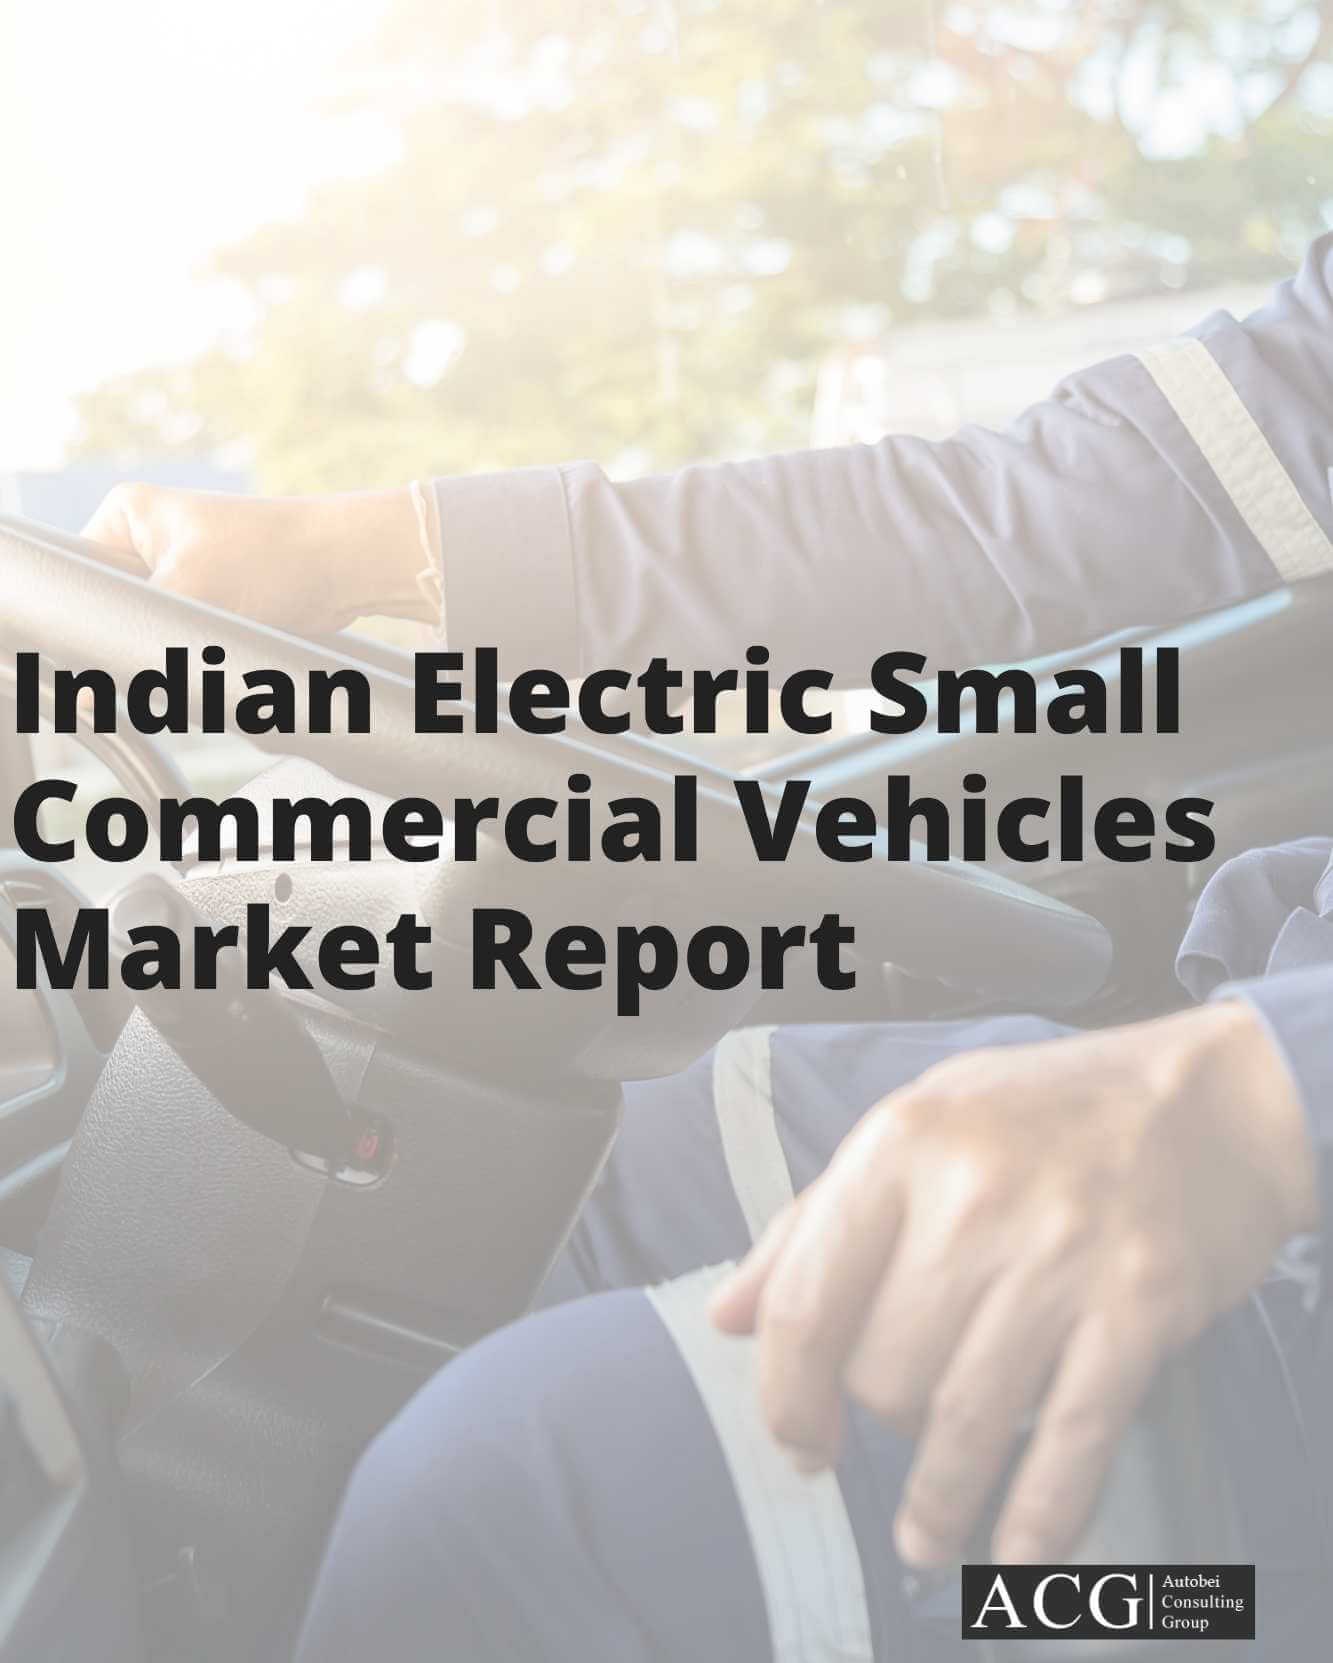 Indian Electric Small Commercial Vehicles Market Analysis